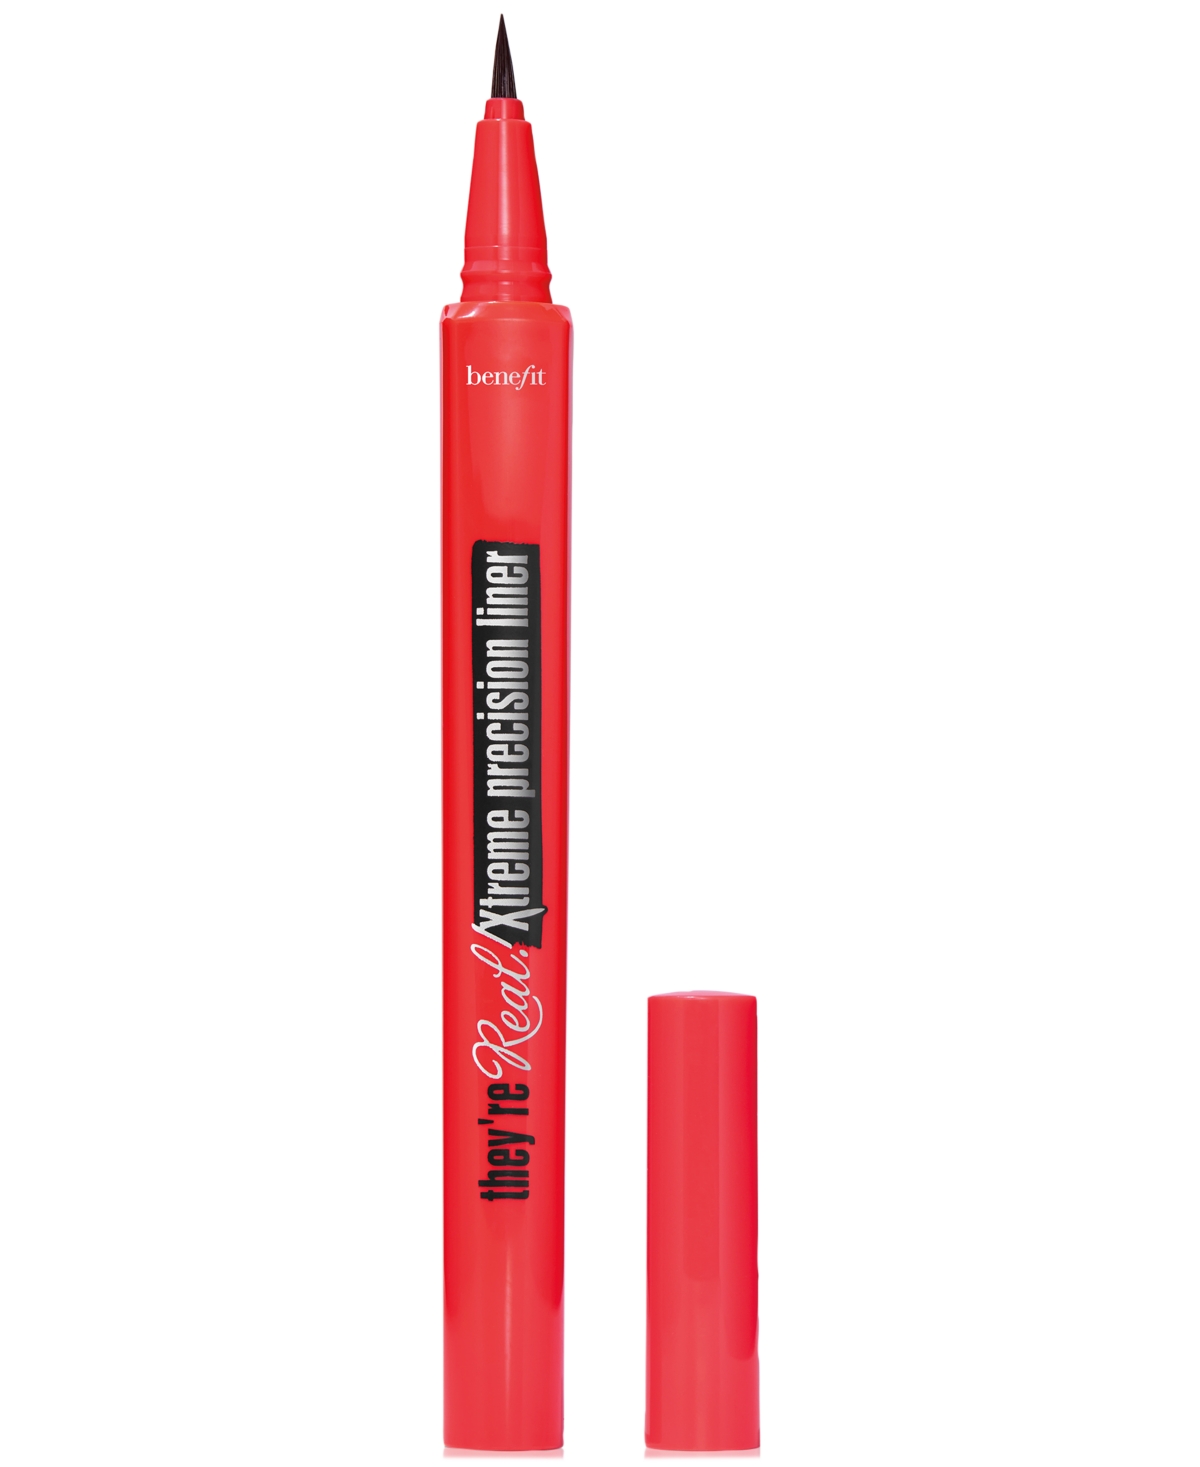 Benefit Cosmetics They're Real! Xtreme Precision Liner In Black